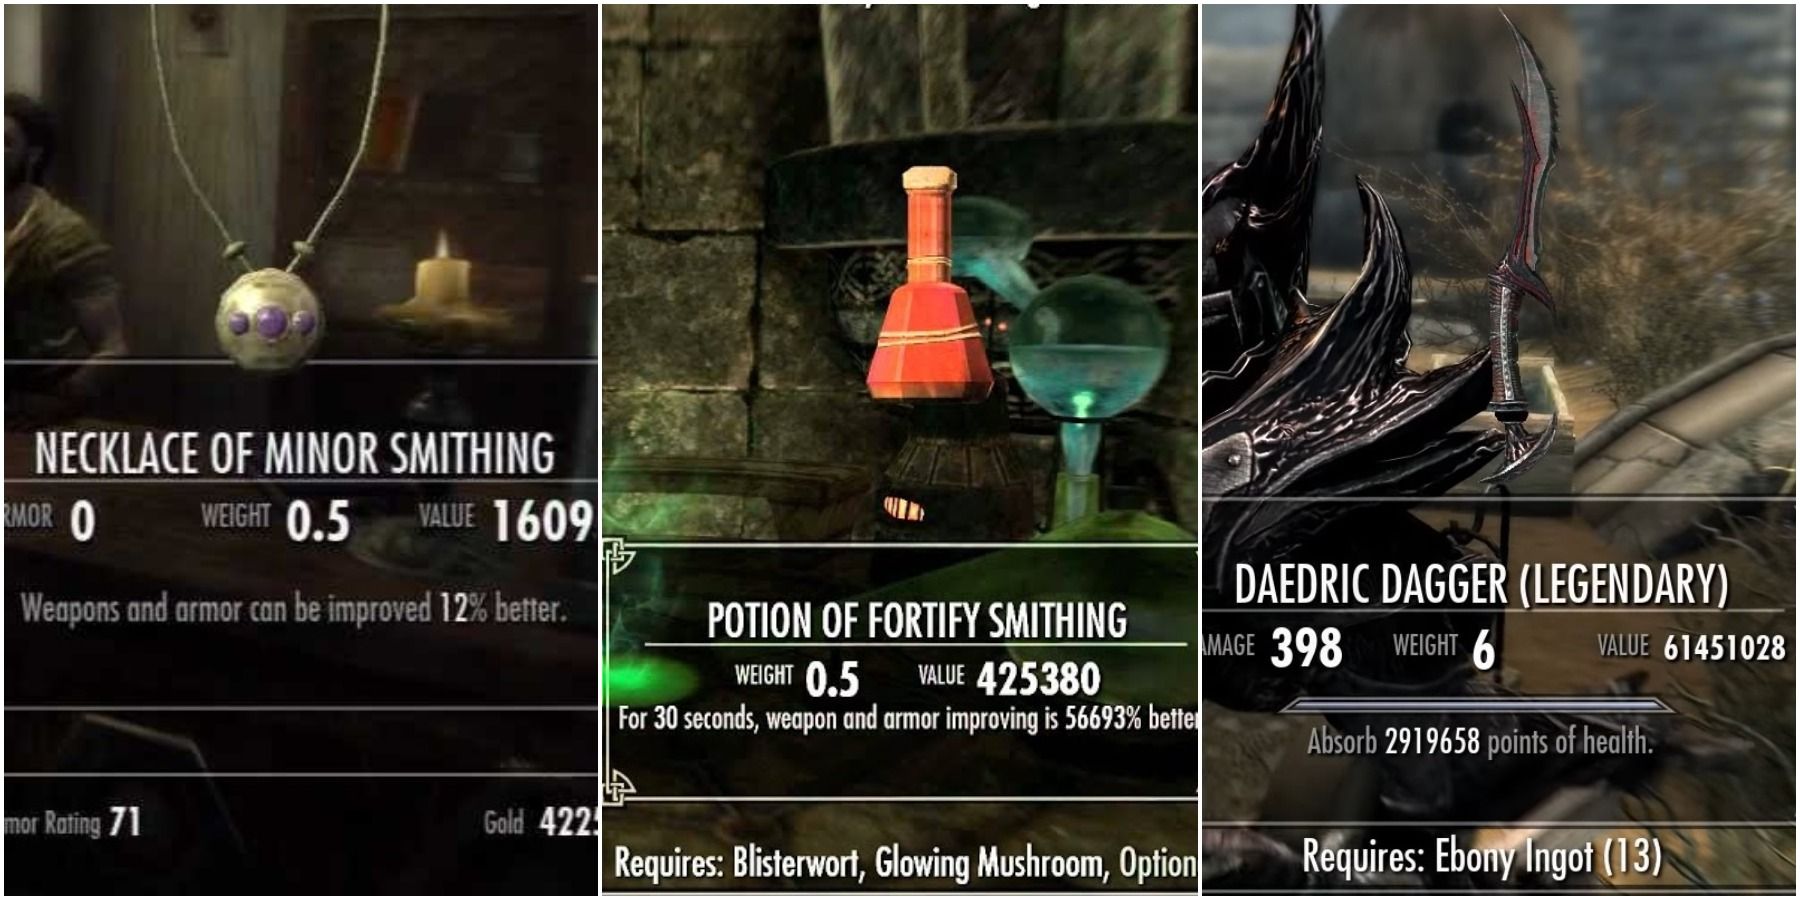 Skyrim Necklace Of Minor Smithing, Potion Of Fortify Smithing and Improved Weapon Damage Via Exploit